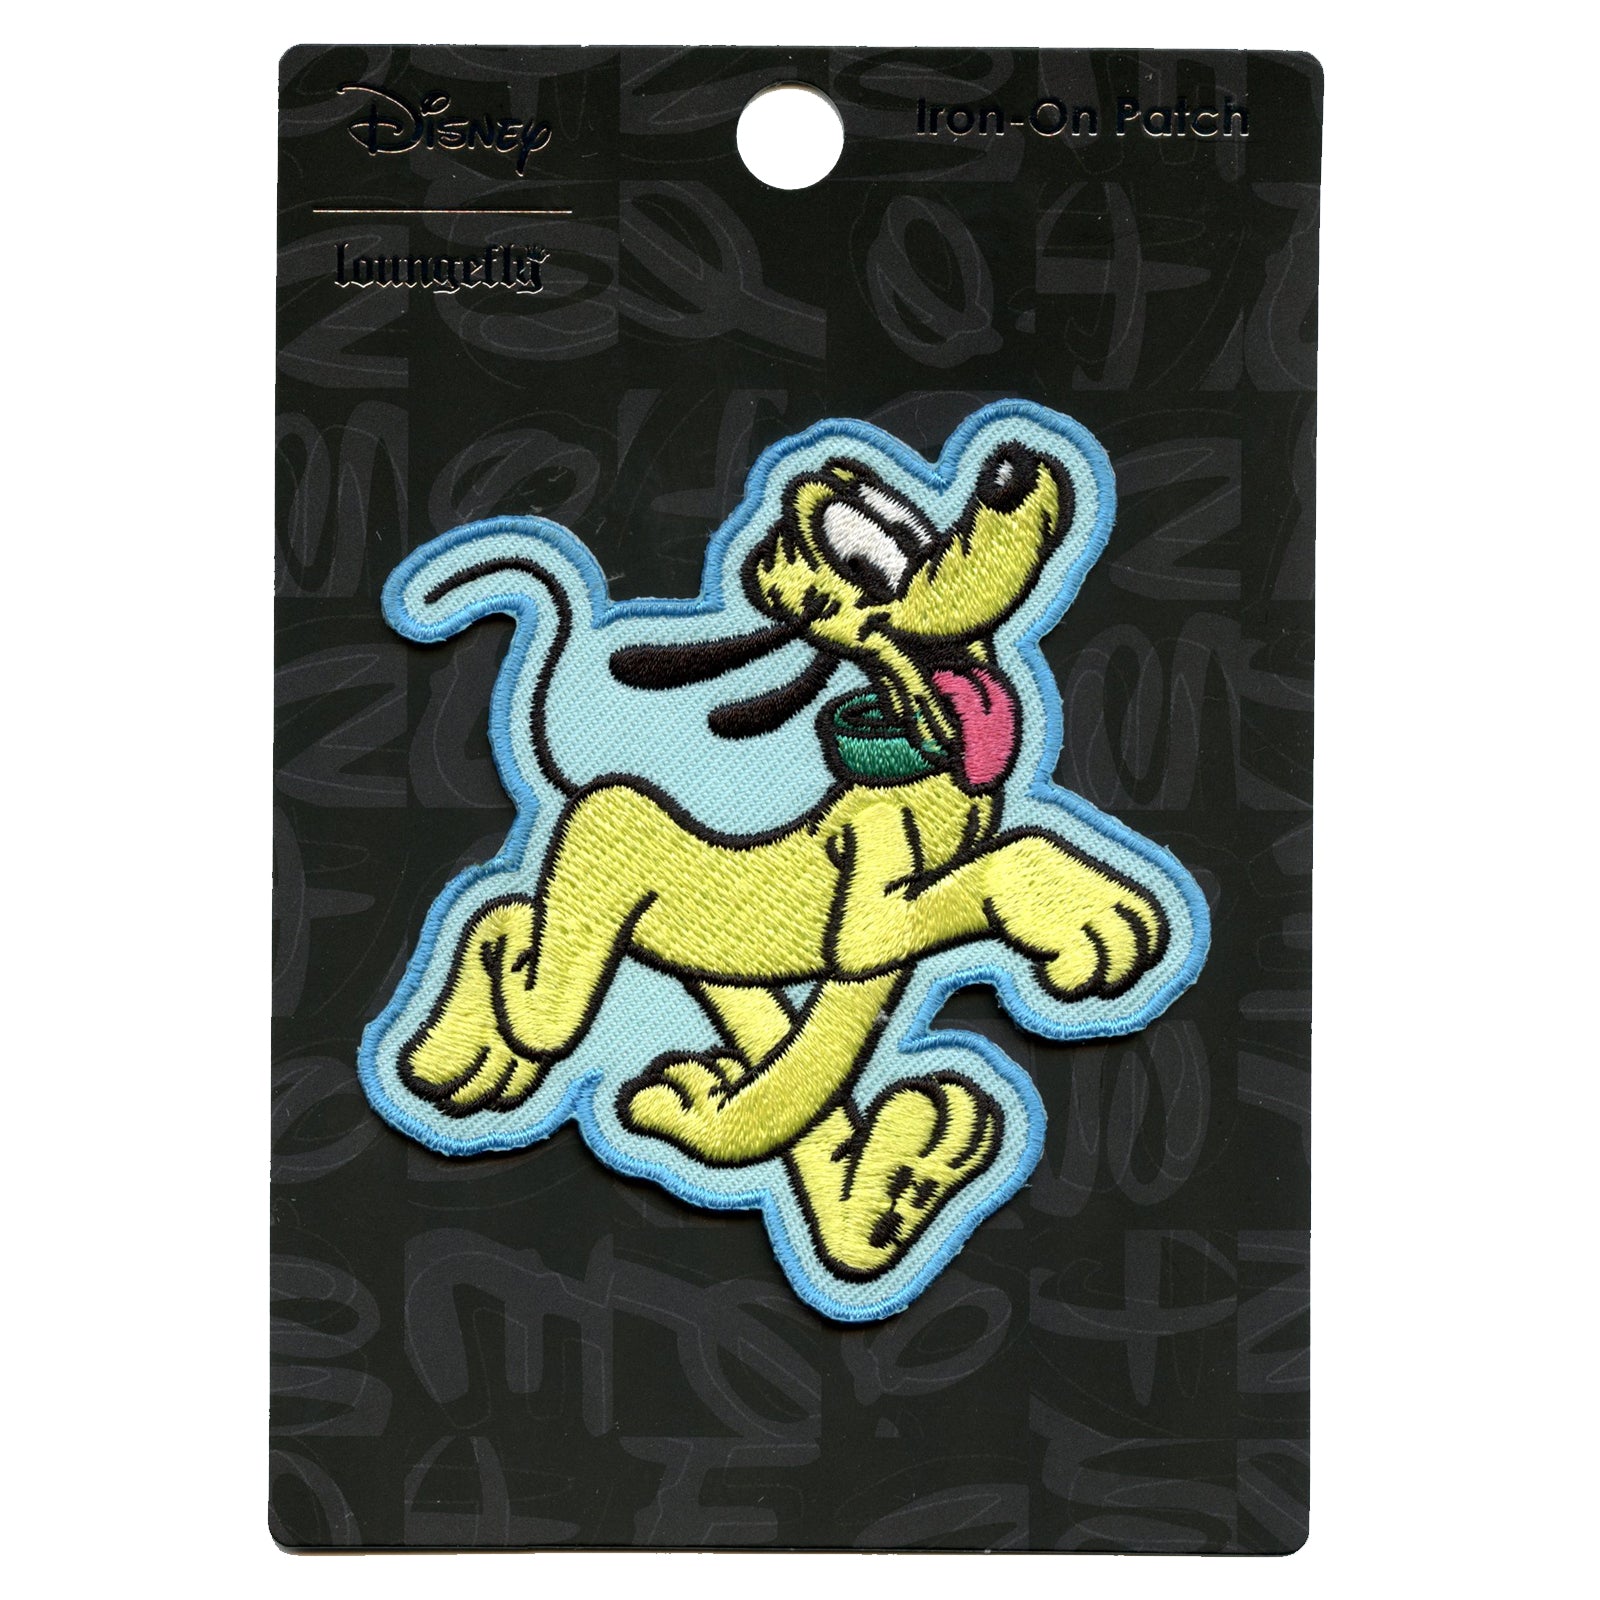 Official Pluto Full Body Embroidered Iron On Patch 